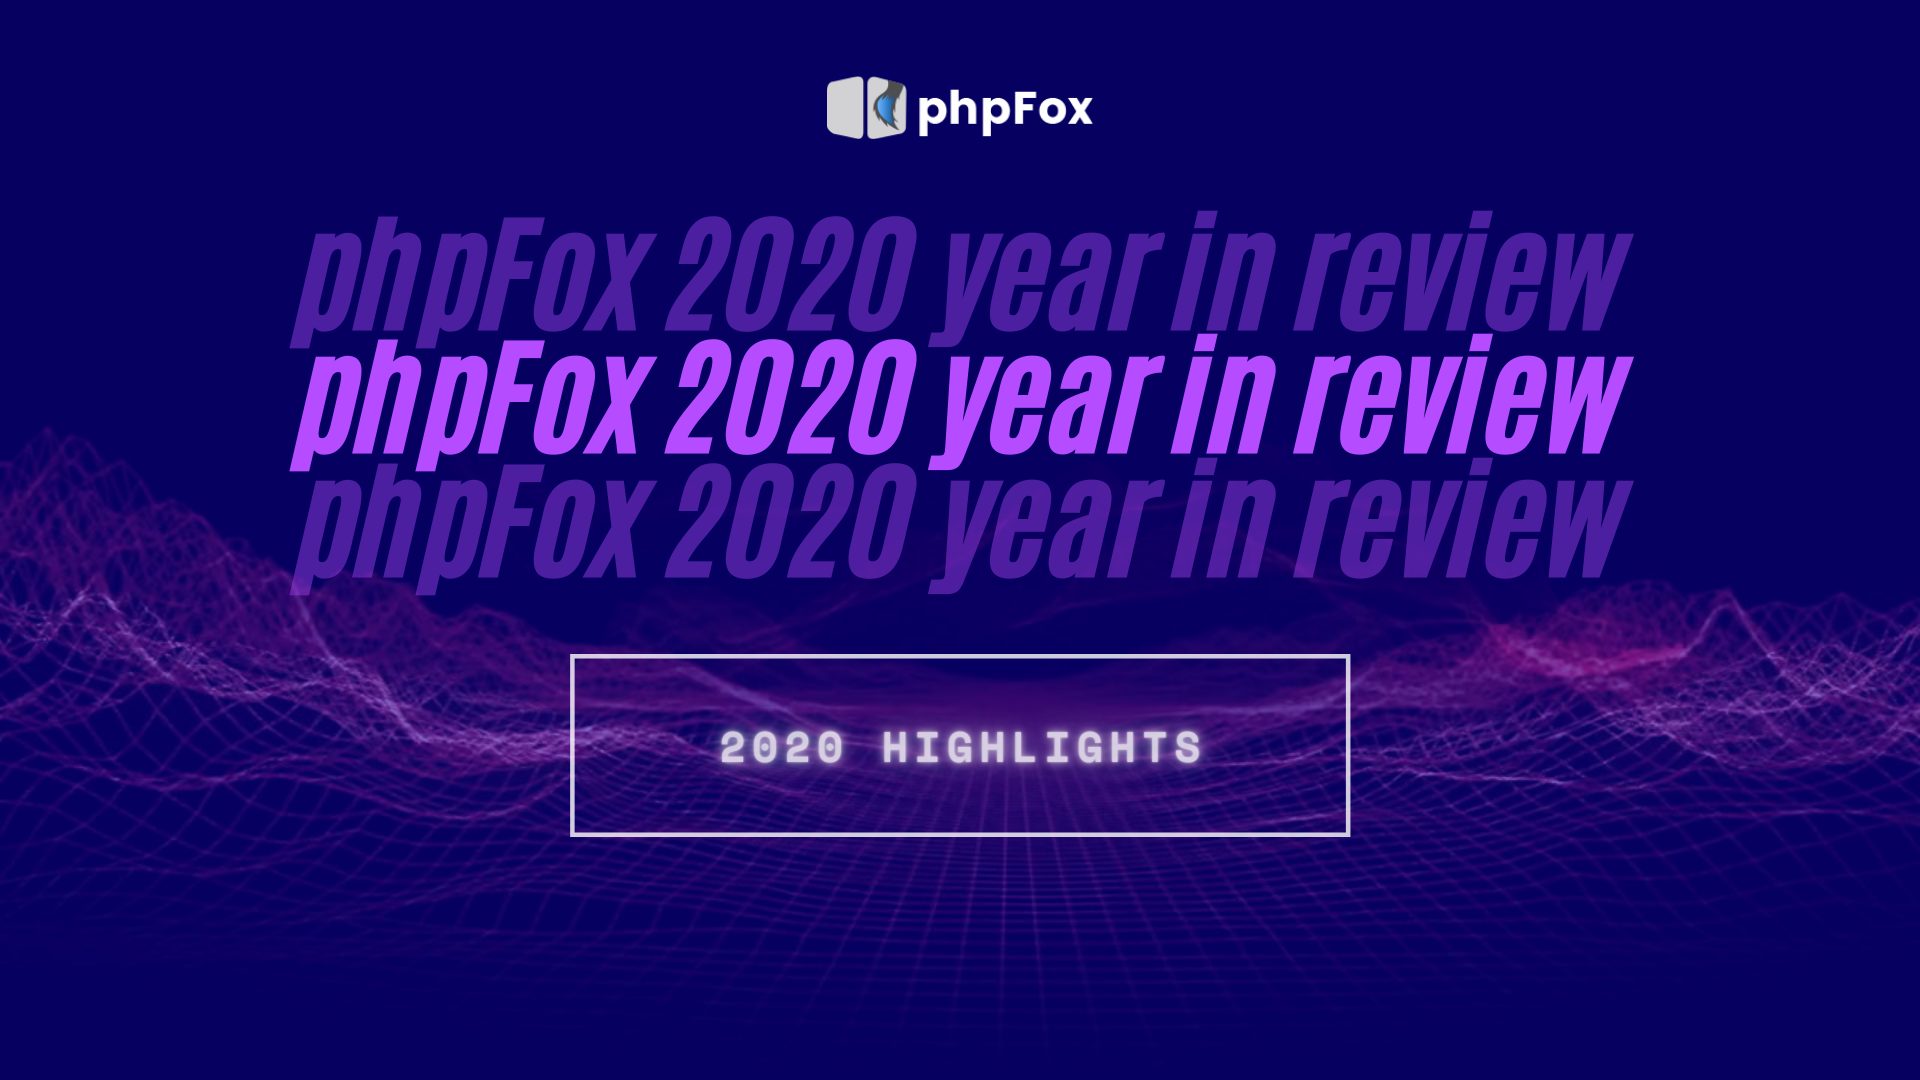 phpFox 2020 Year In Review